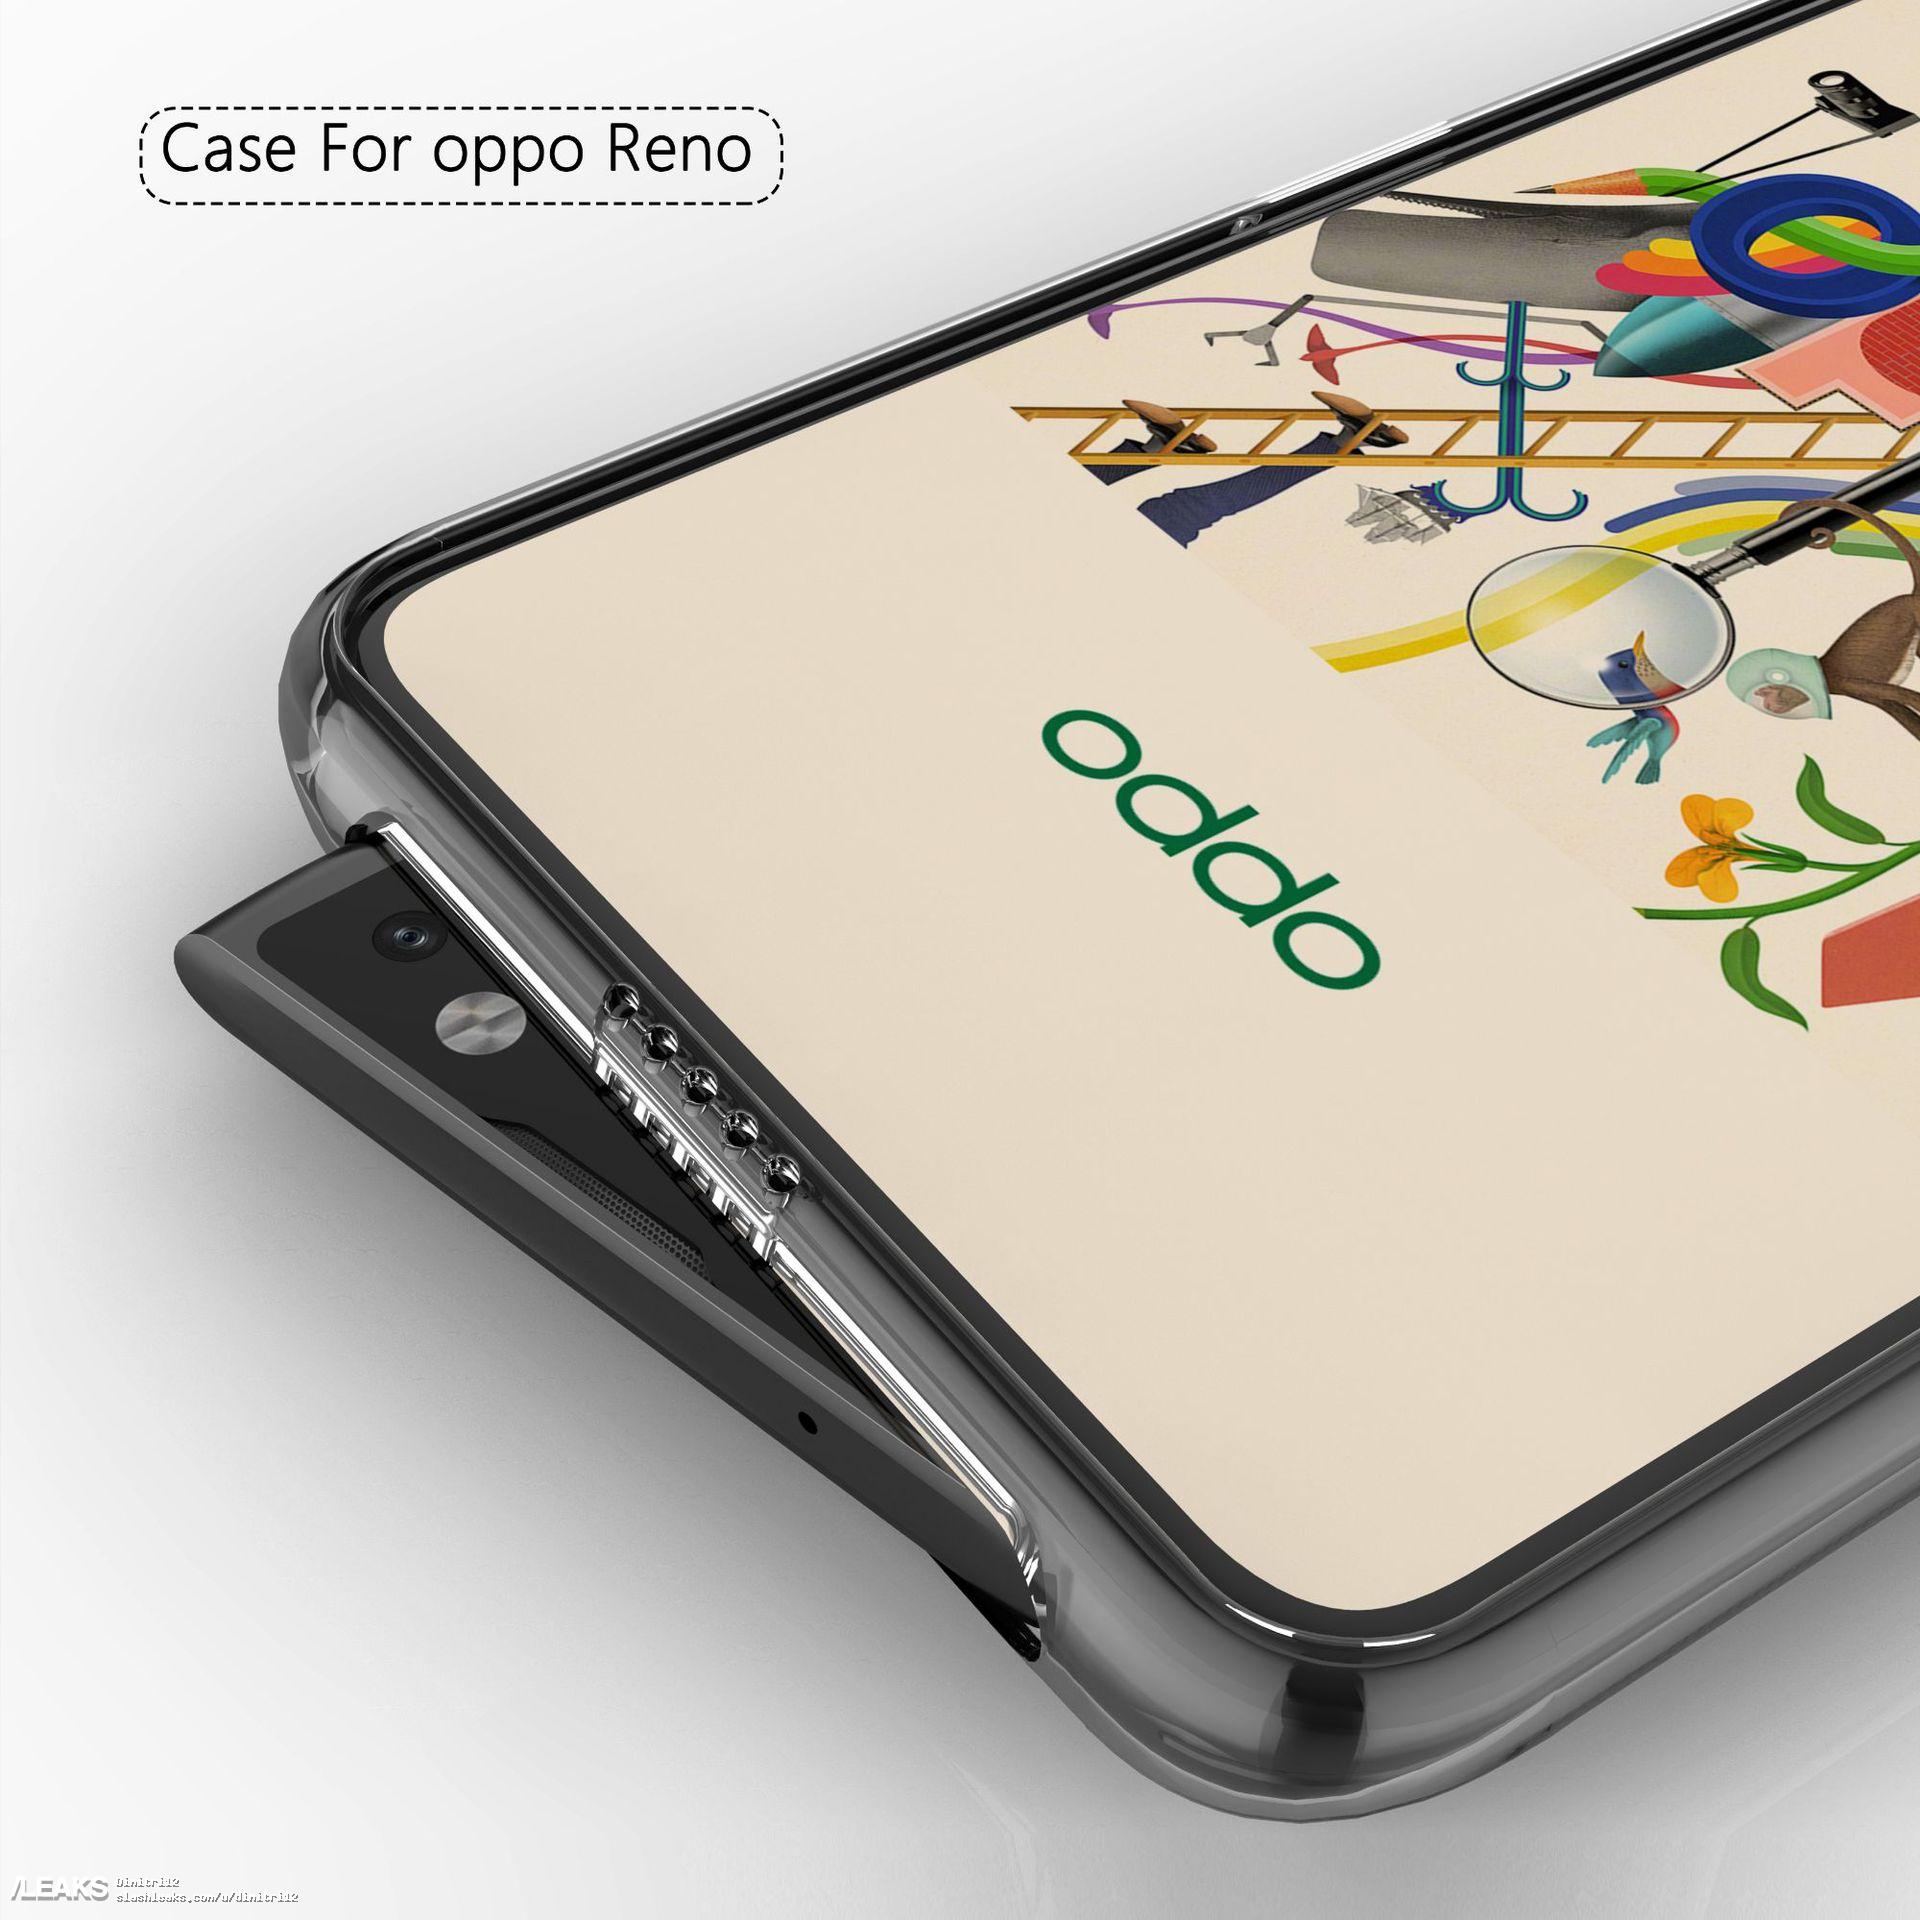 OPPO Reno SD855 edition to feature copper tube liquid cooling